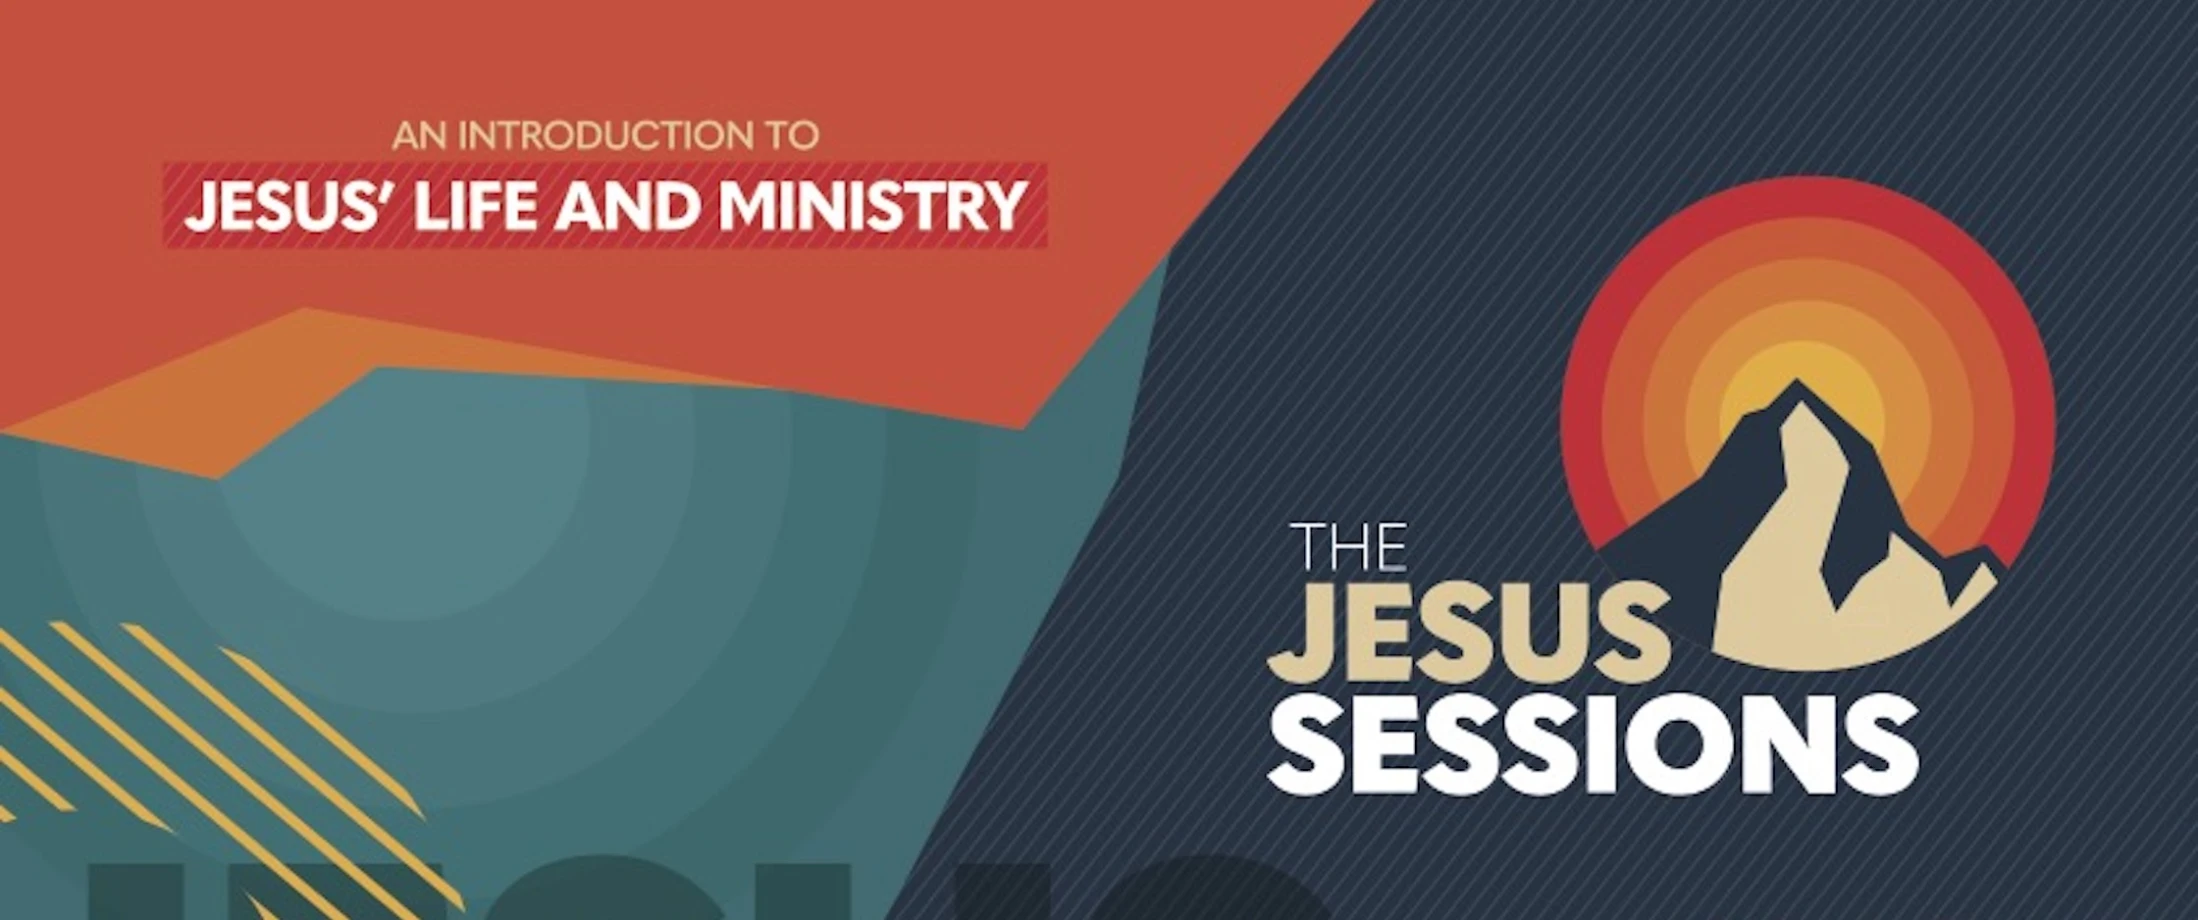 New youth resource introduces life and ministry of Jesus